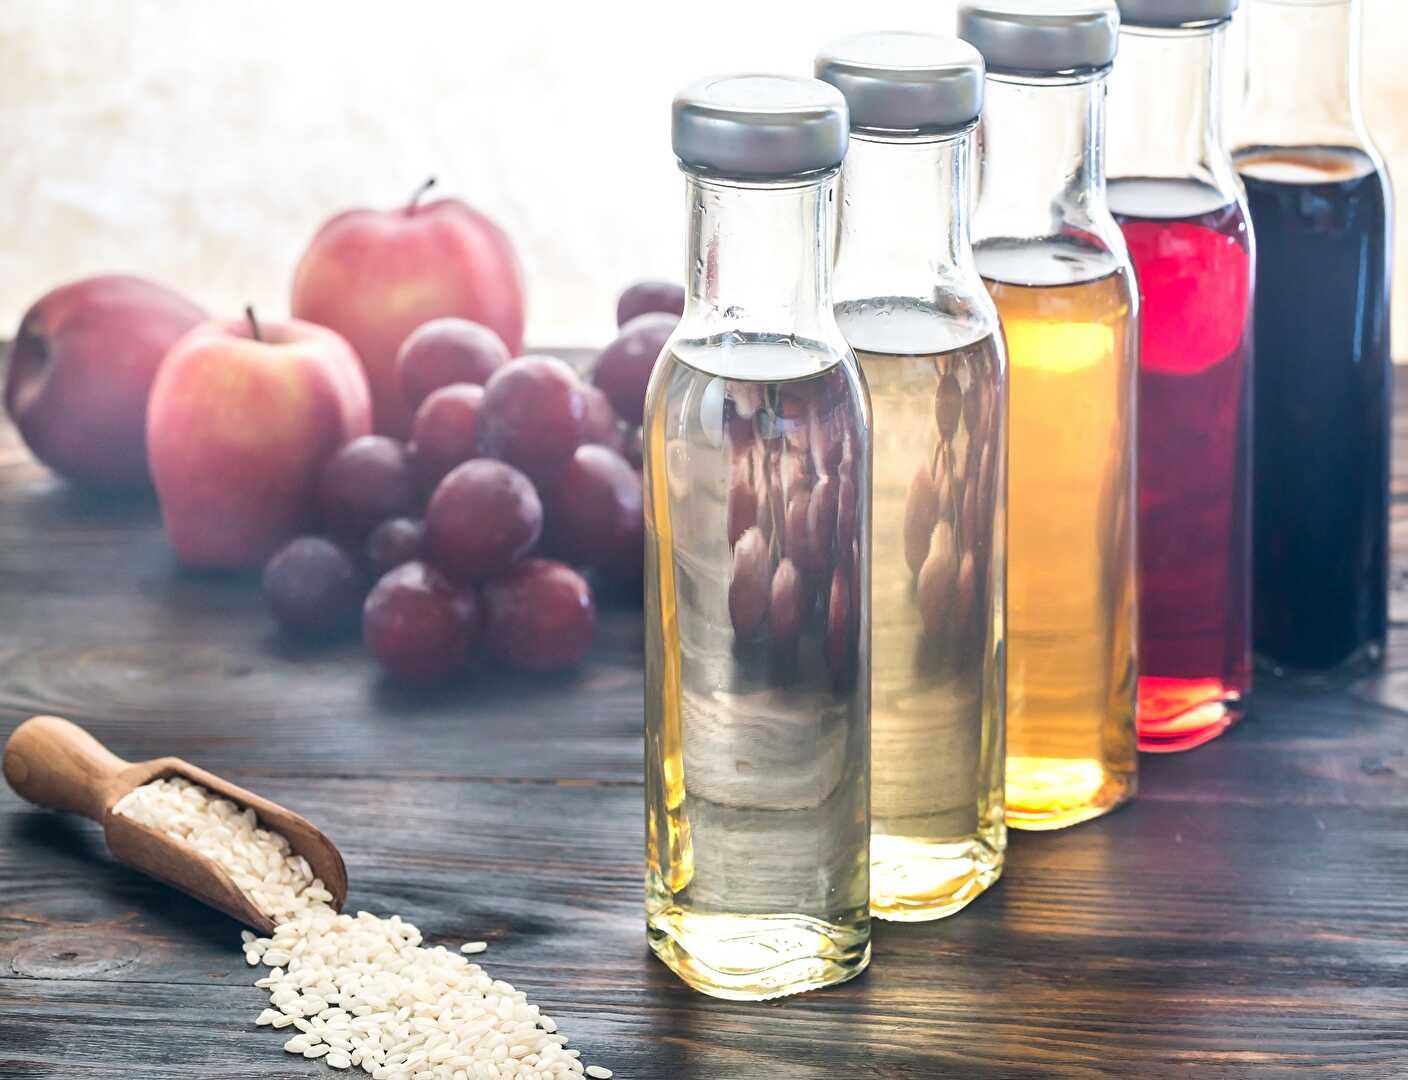 How to make your own vinegar: An article on the different steps to make your own vinegar.